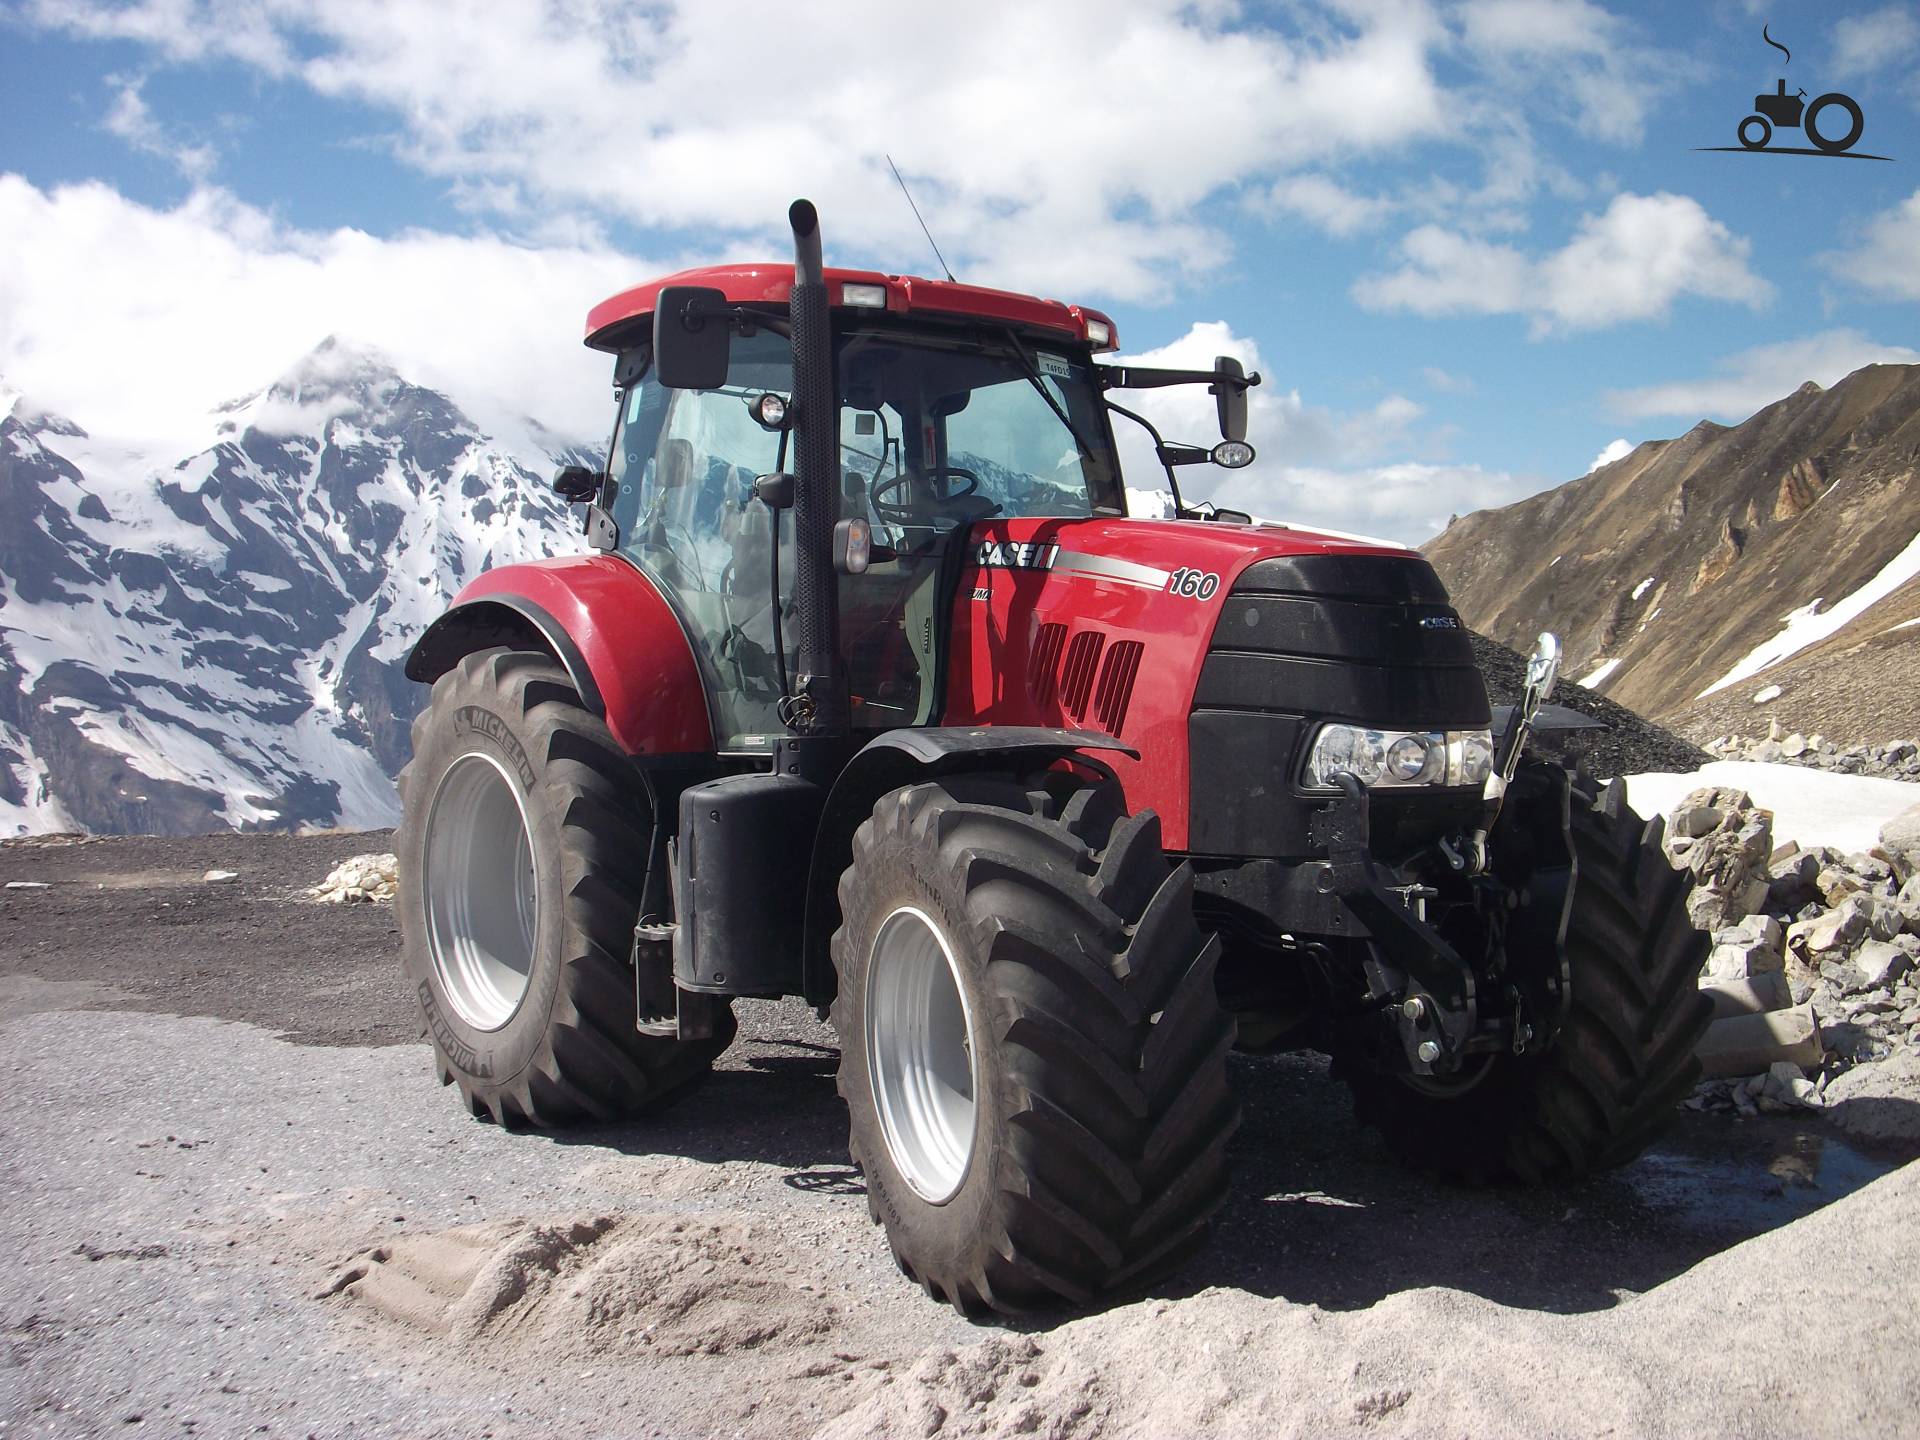 Case IH Puma 160 Specs and data - Everything about the Case IH Puma ...